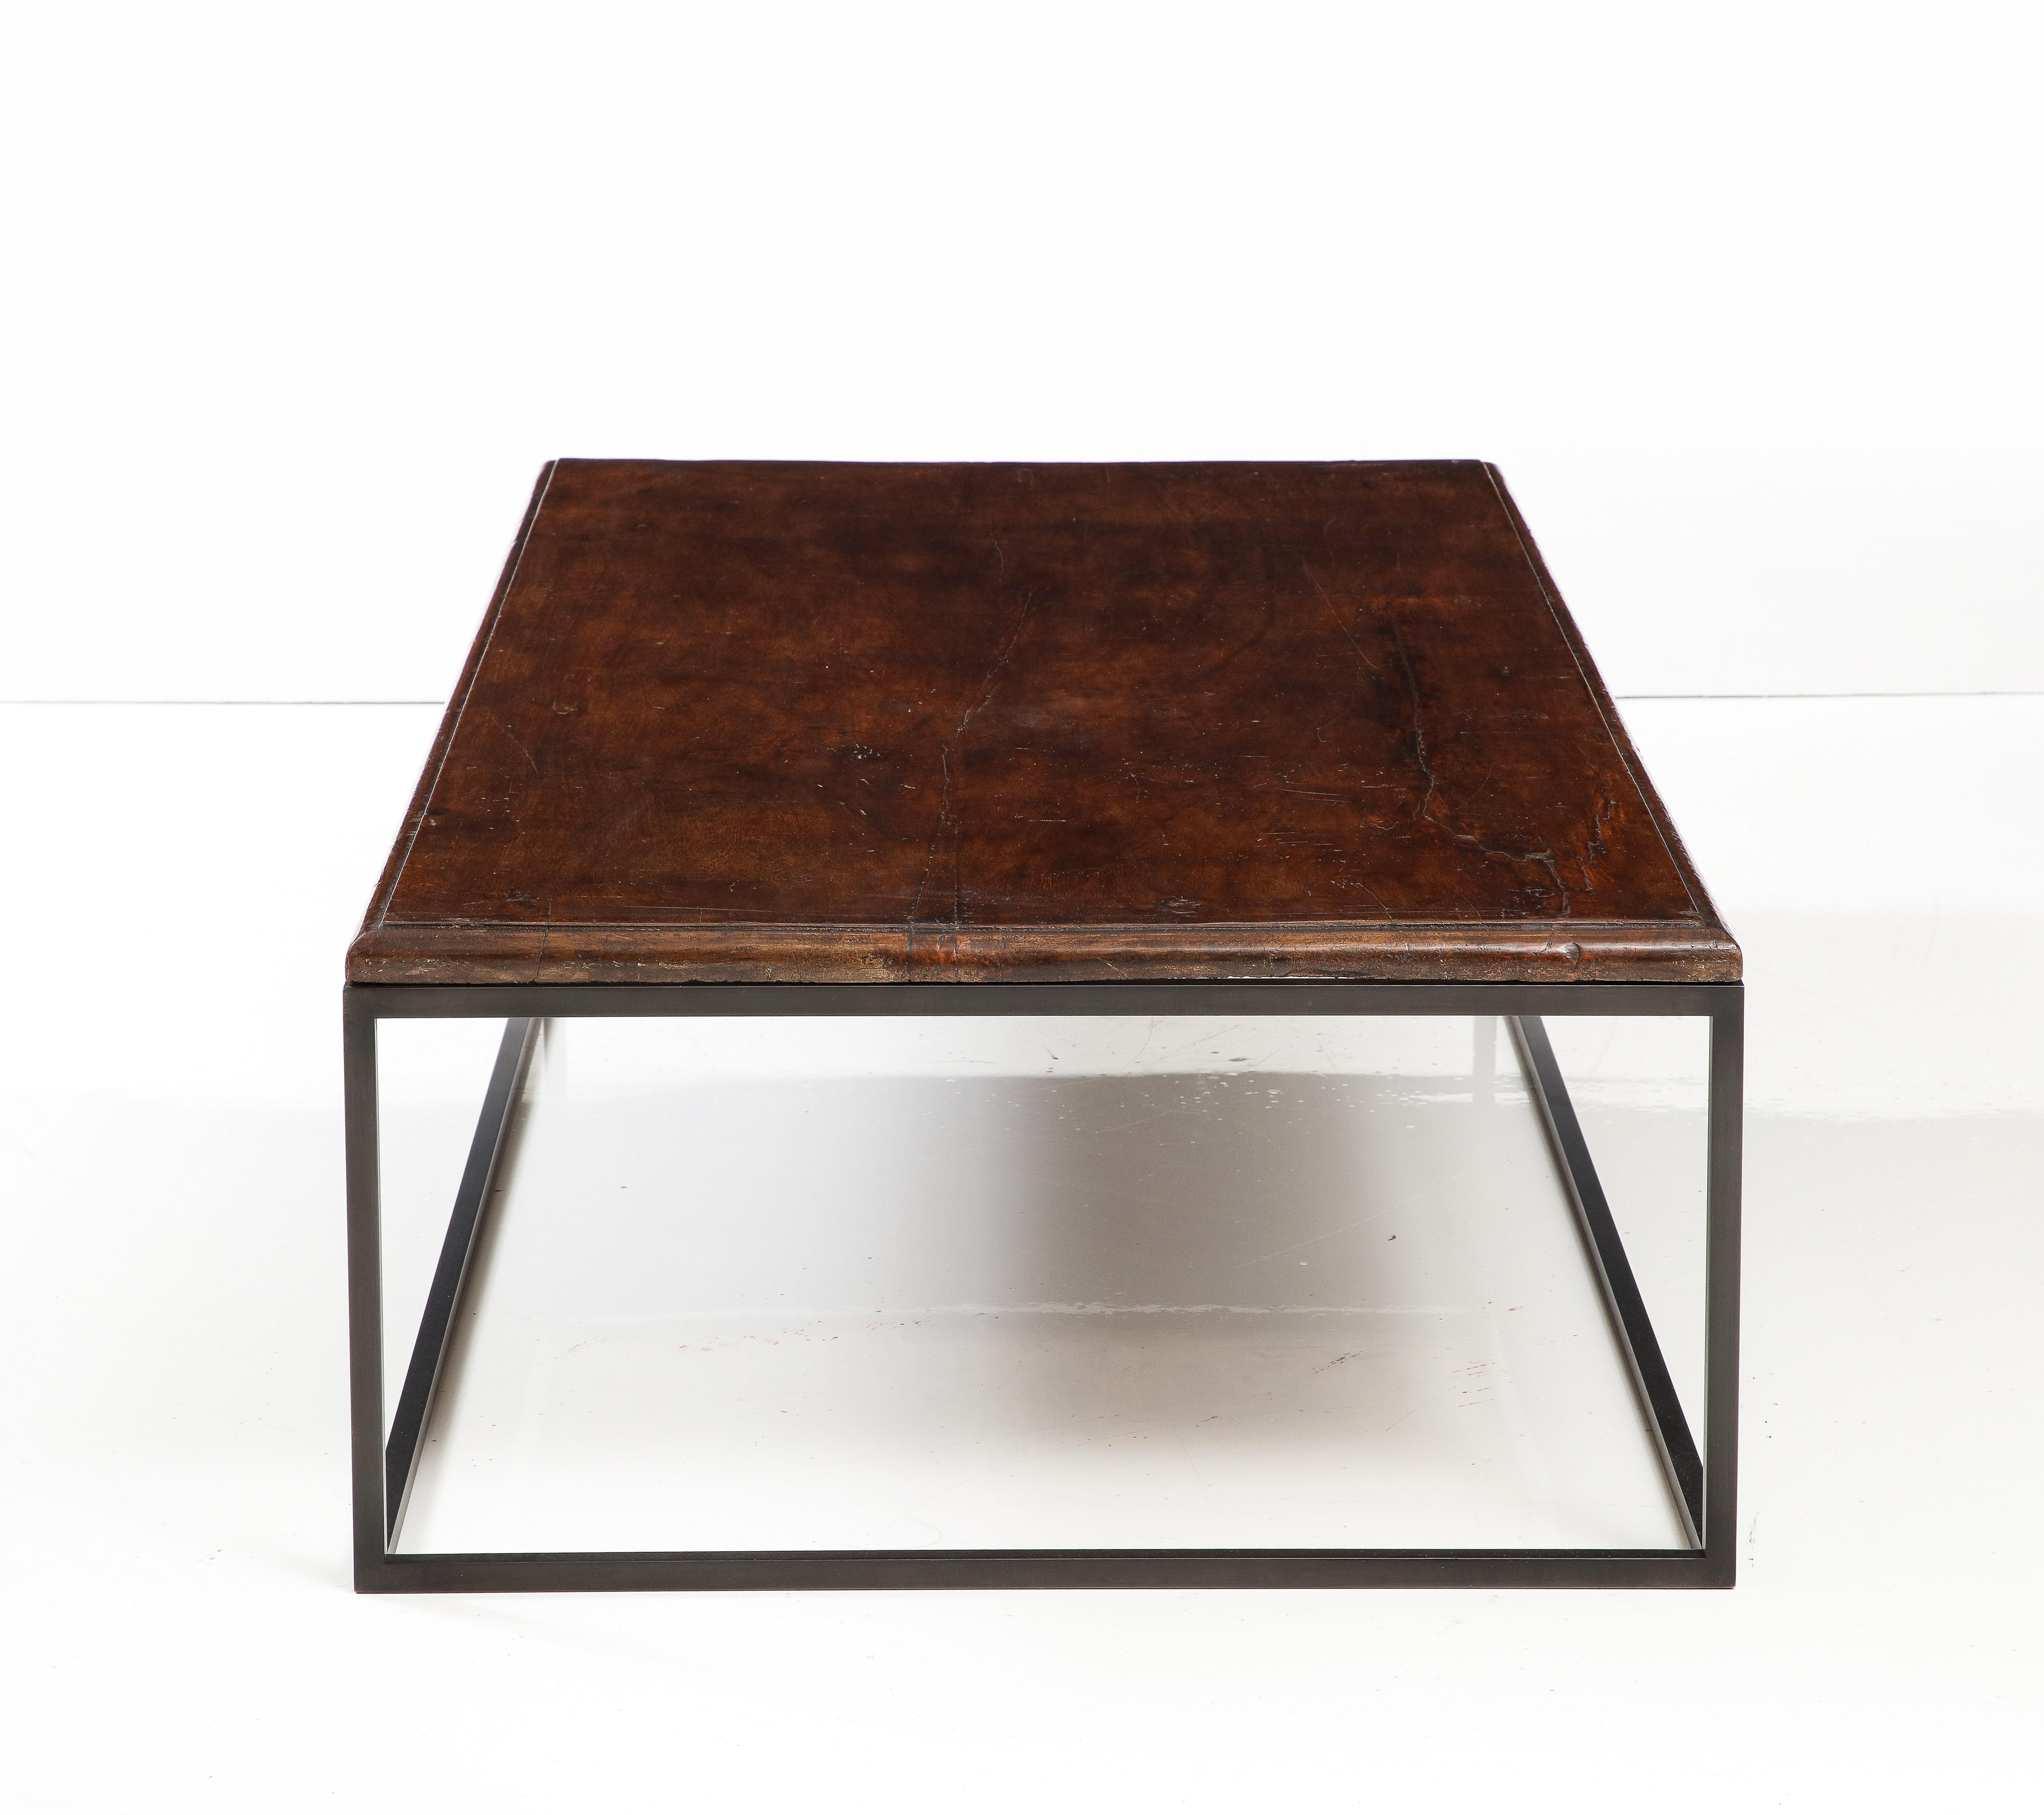 18th C. Italian Dark Walnut Coffee Table in One Thick Piece with Edge Detail In Good Condition For Sale In Brooklyn, NY